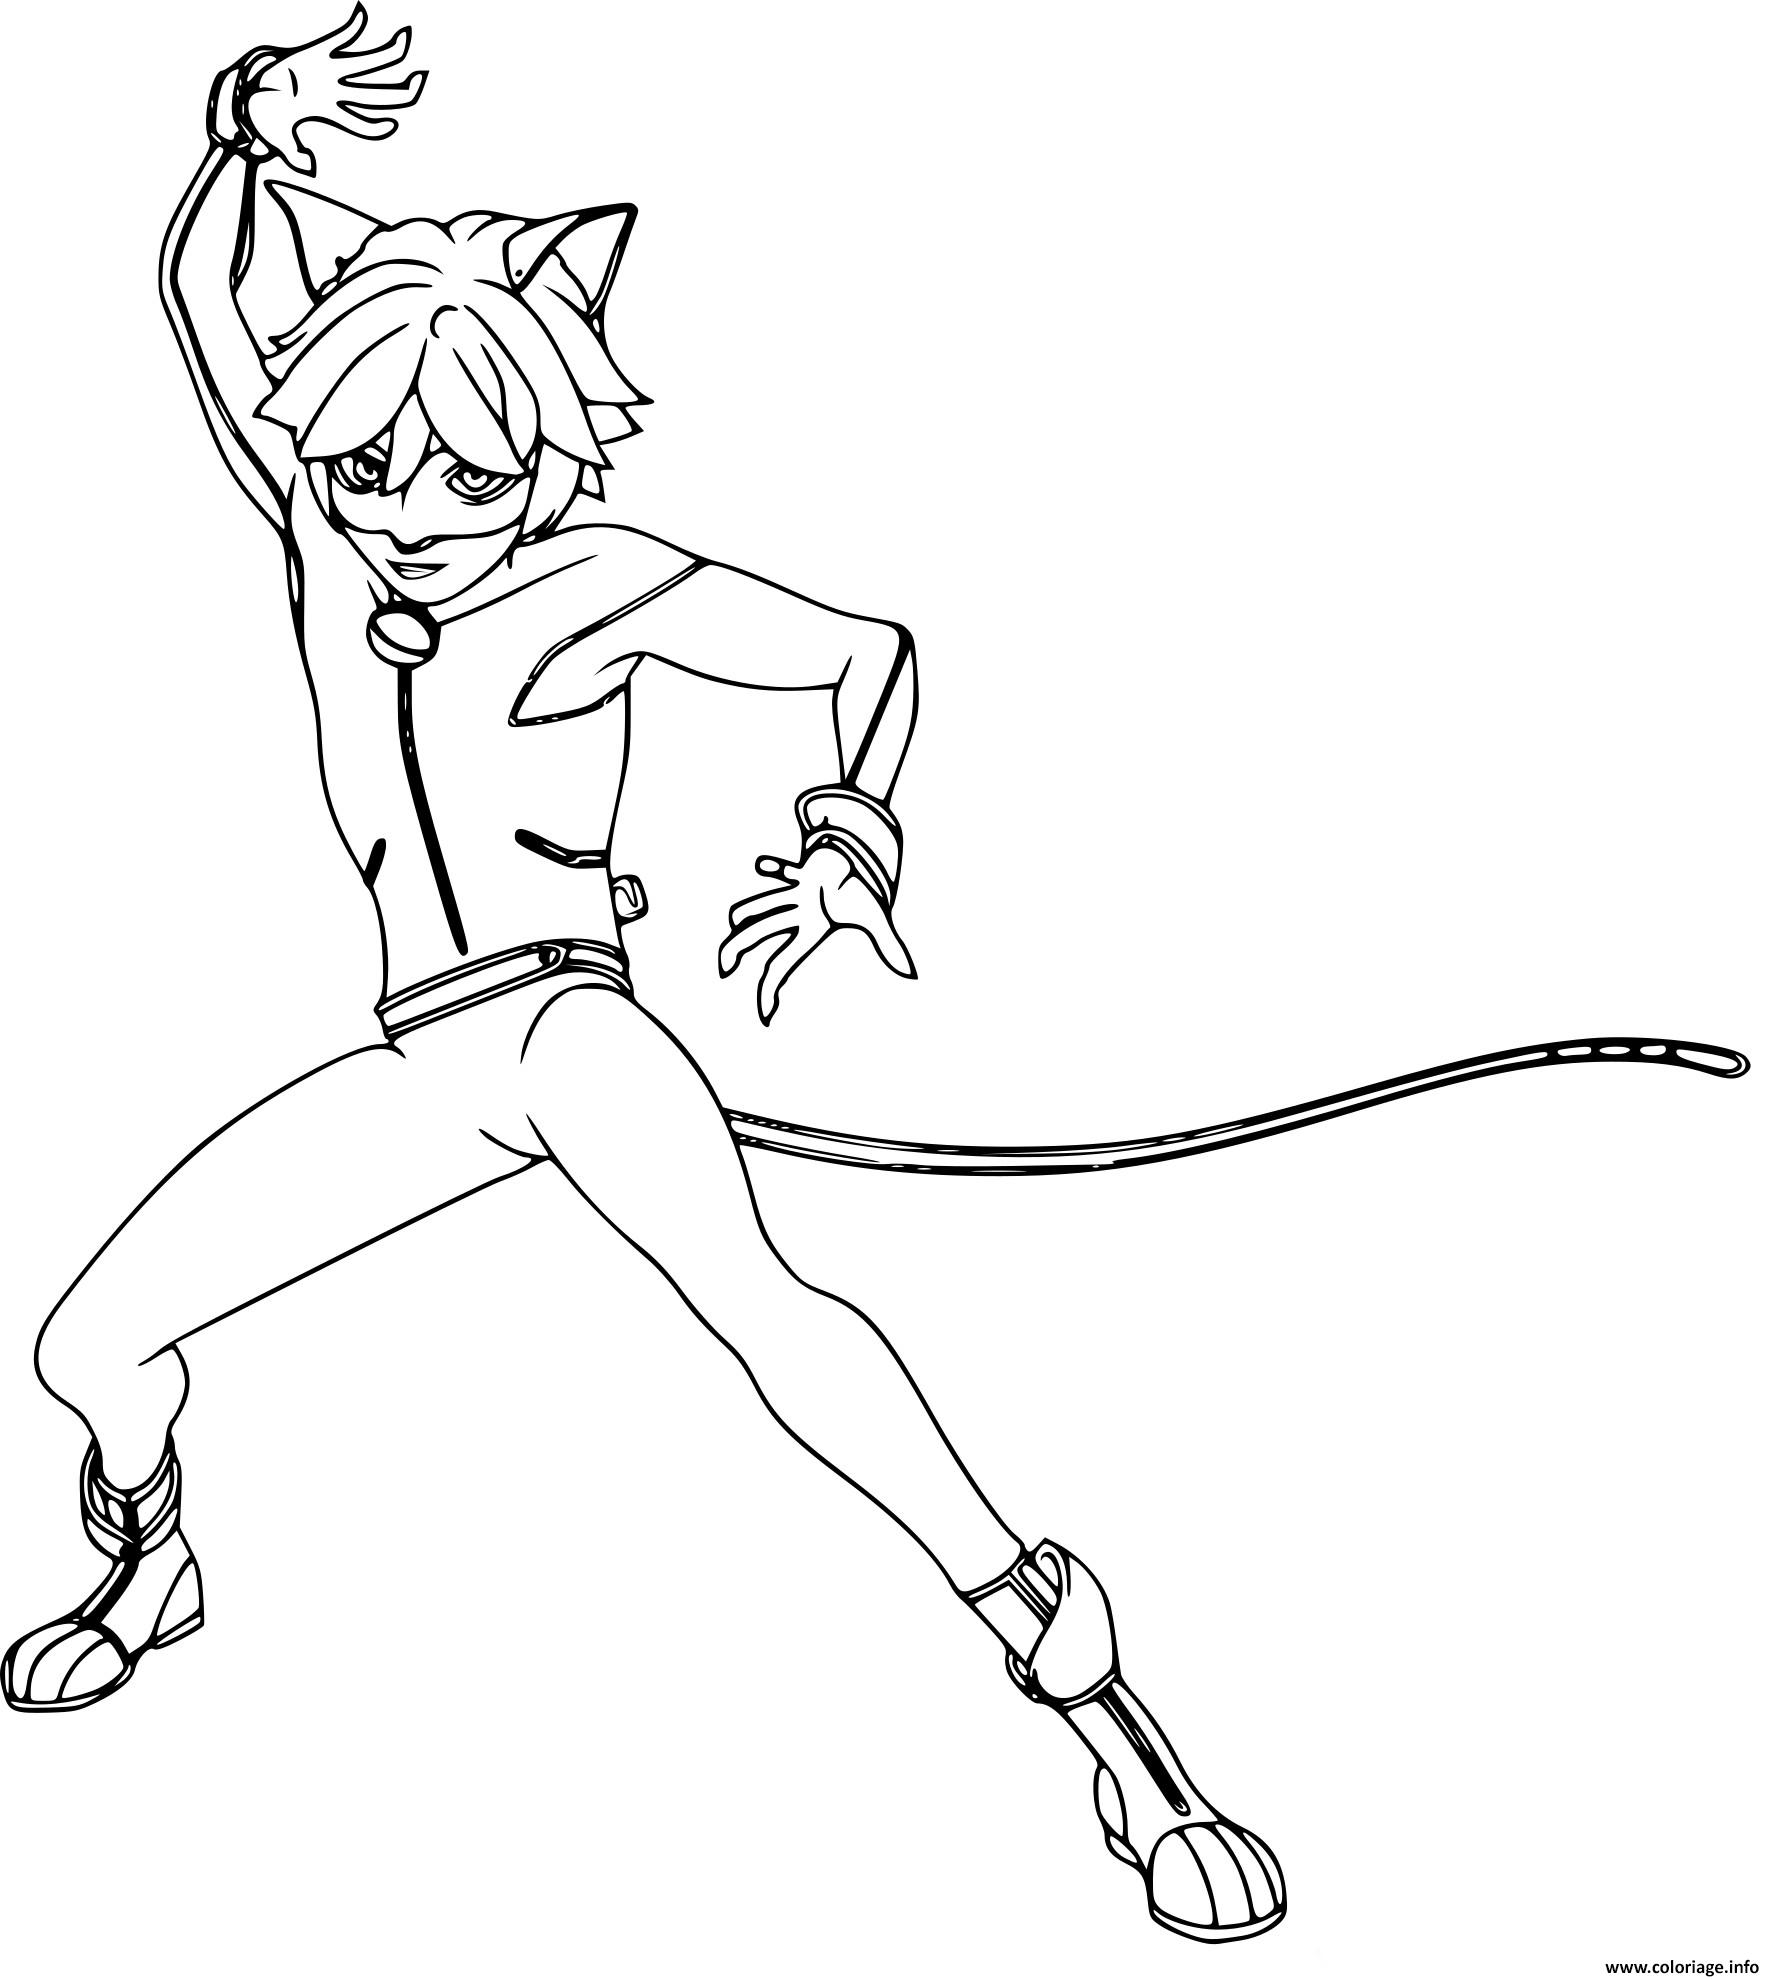 Coloriage miraculous